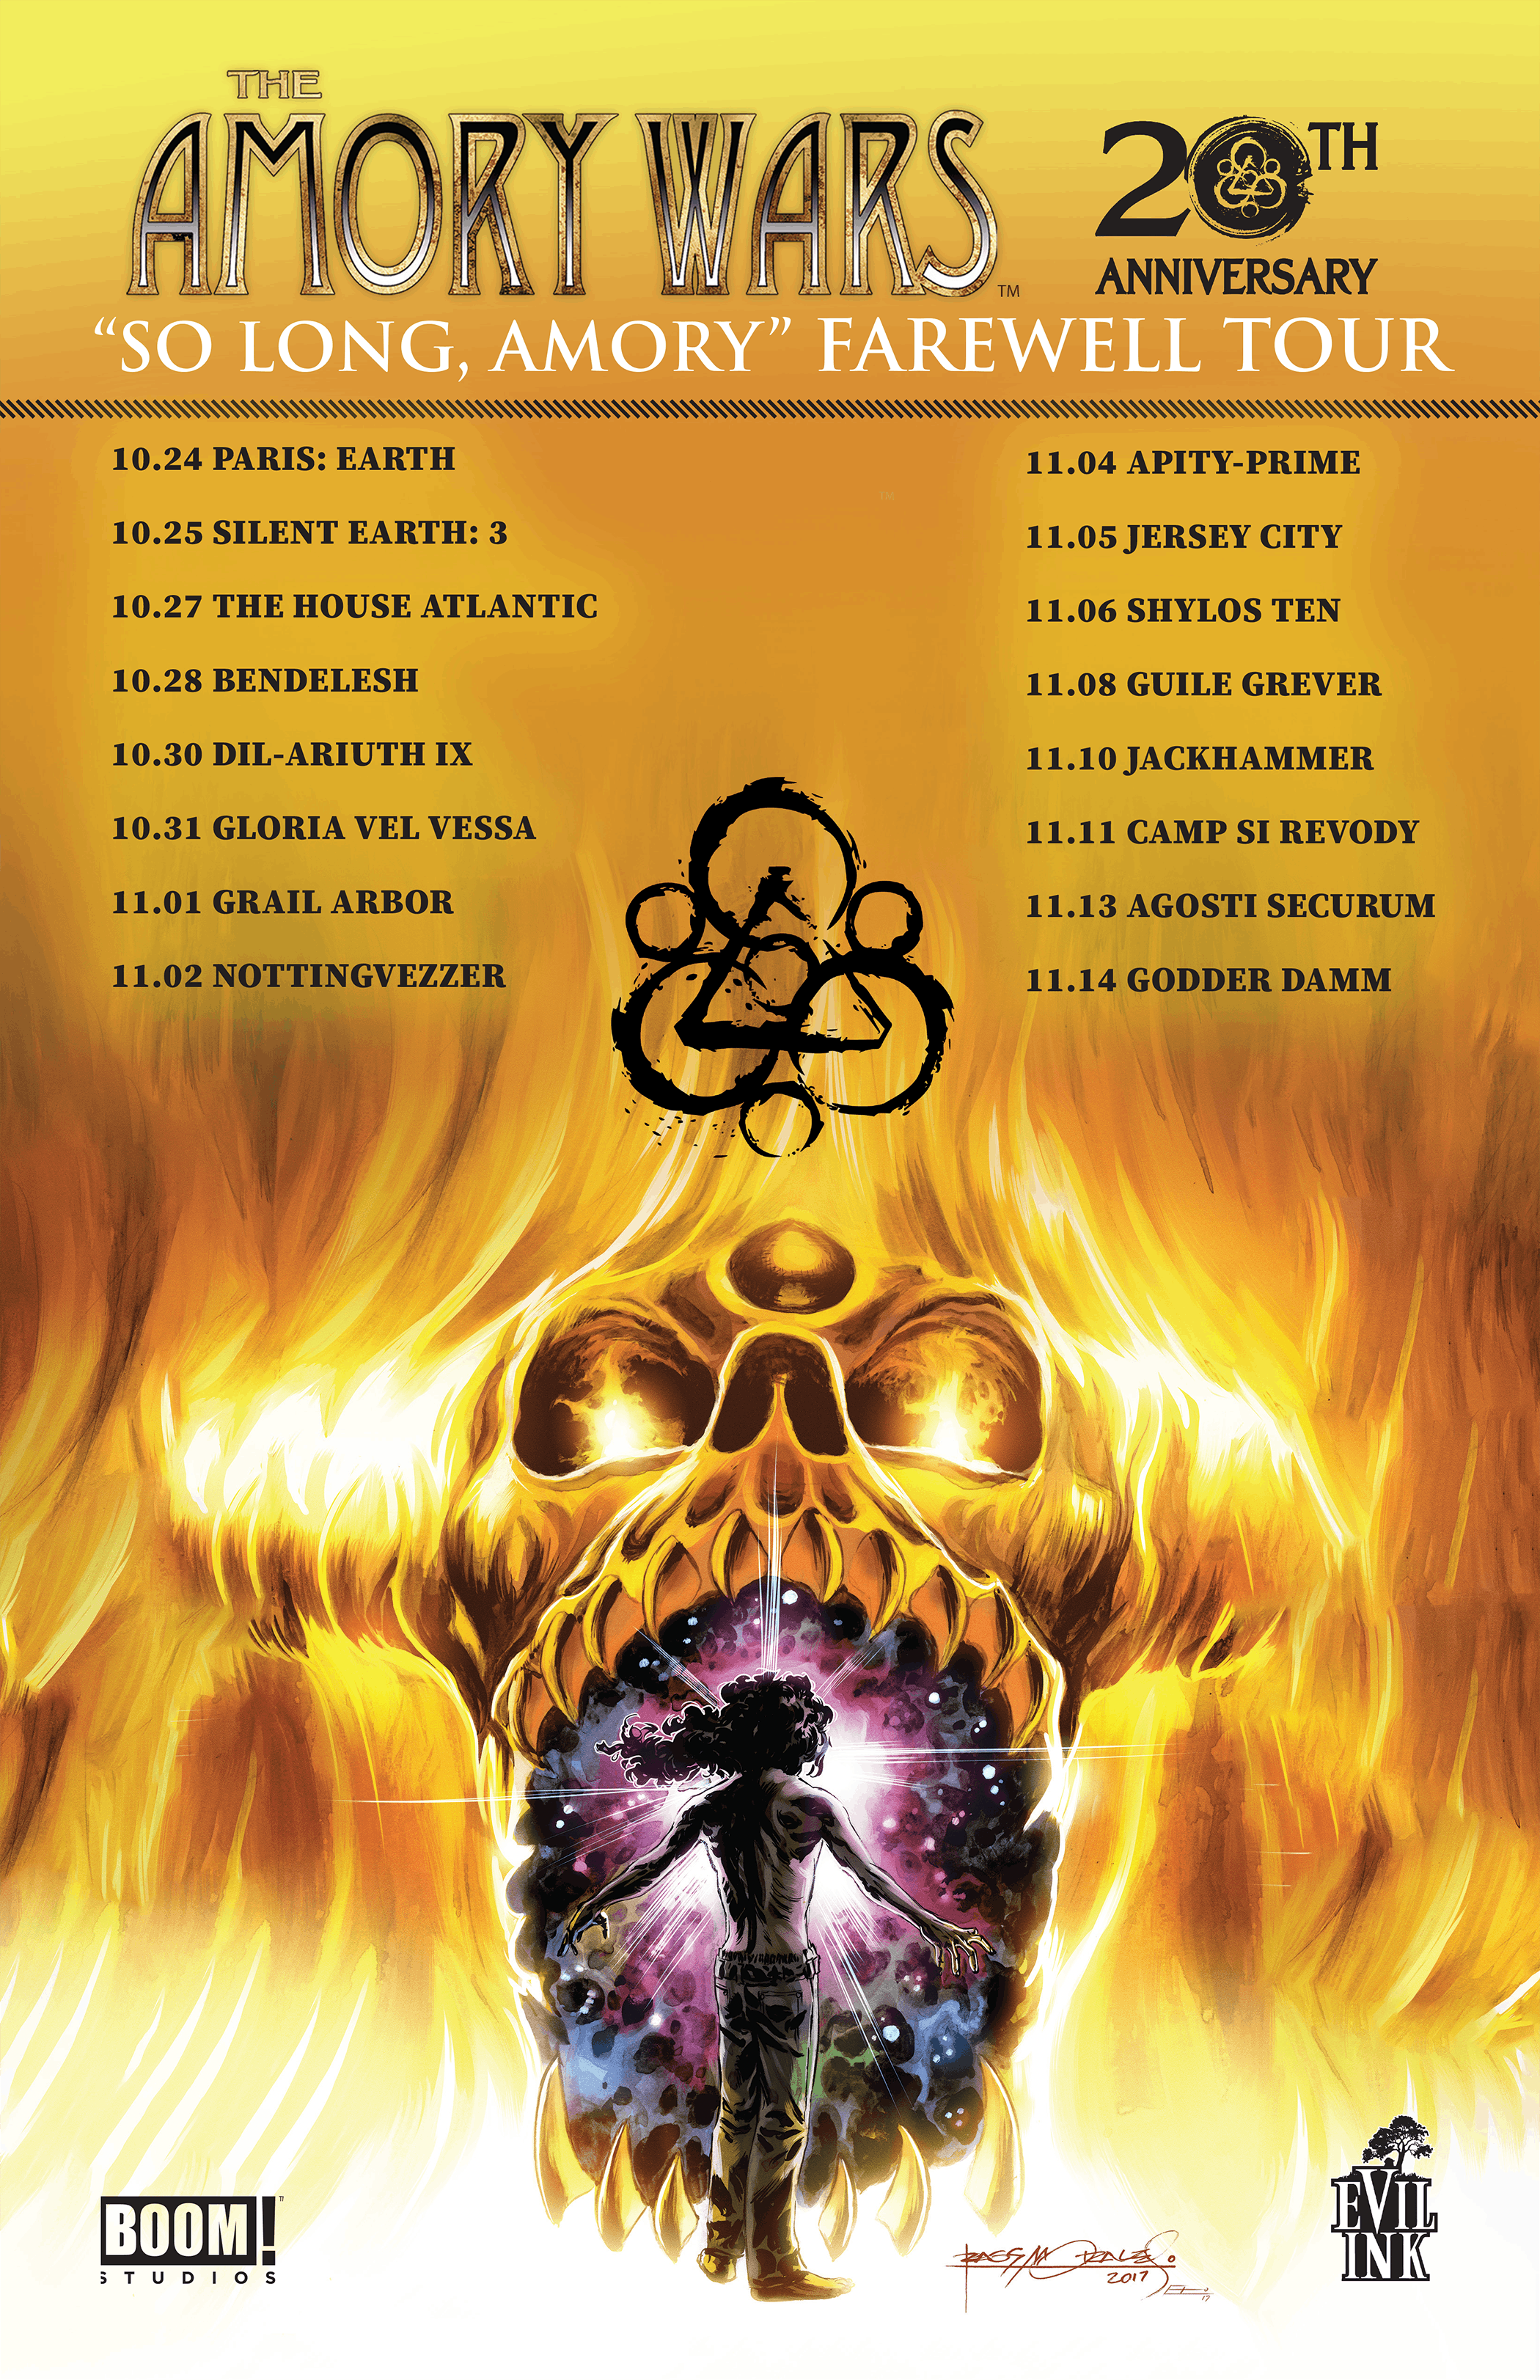 Amory Wars "Tour Poster"